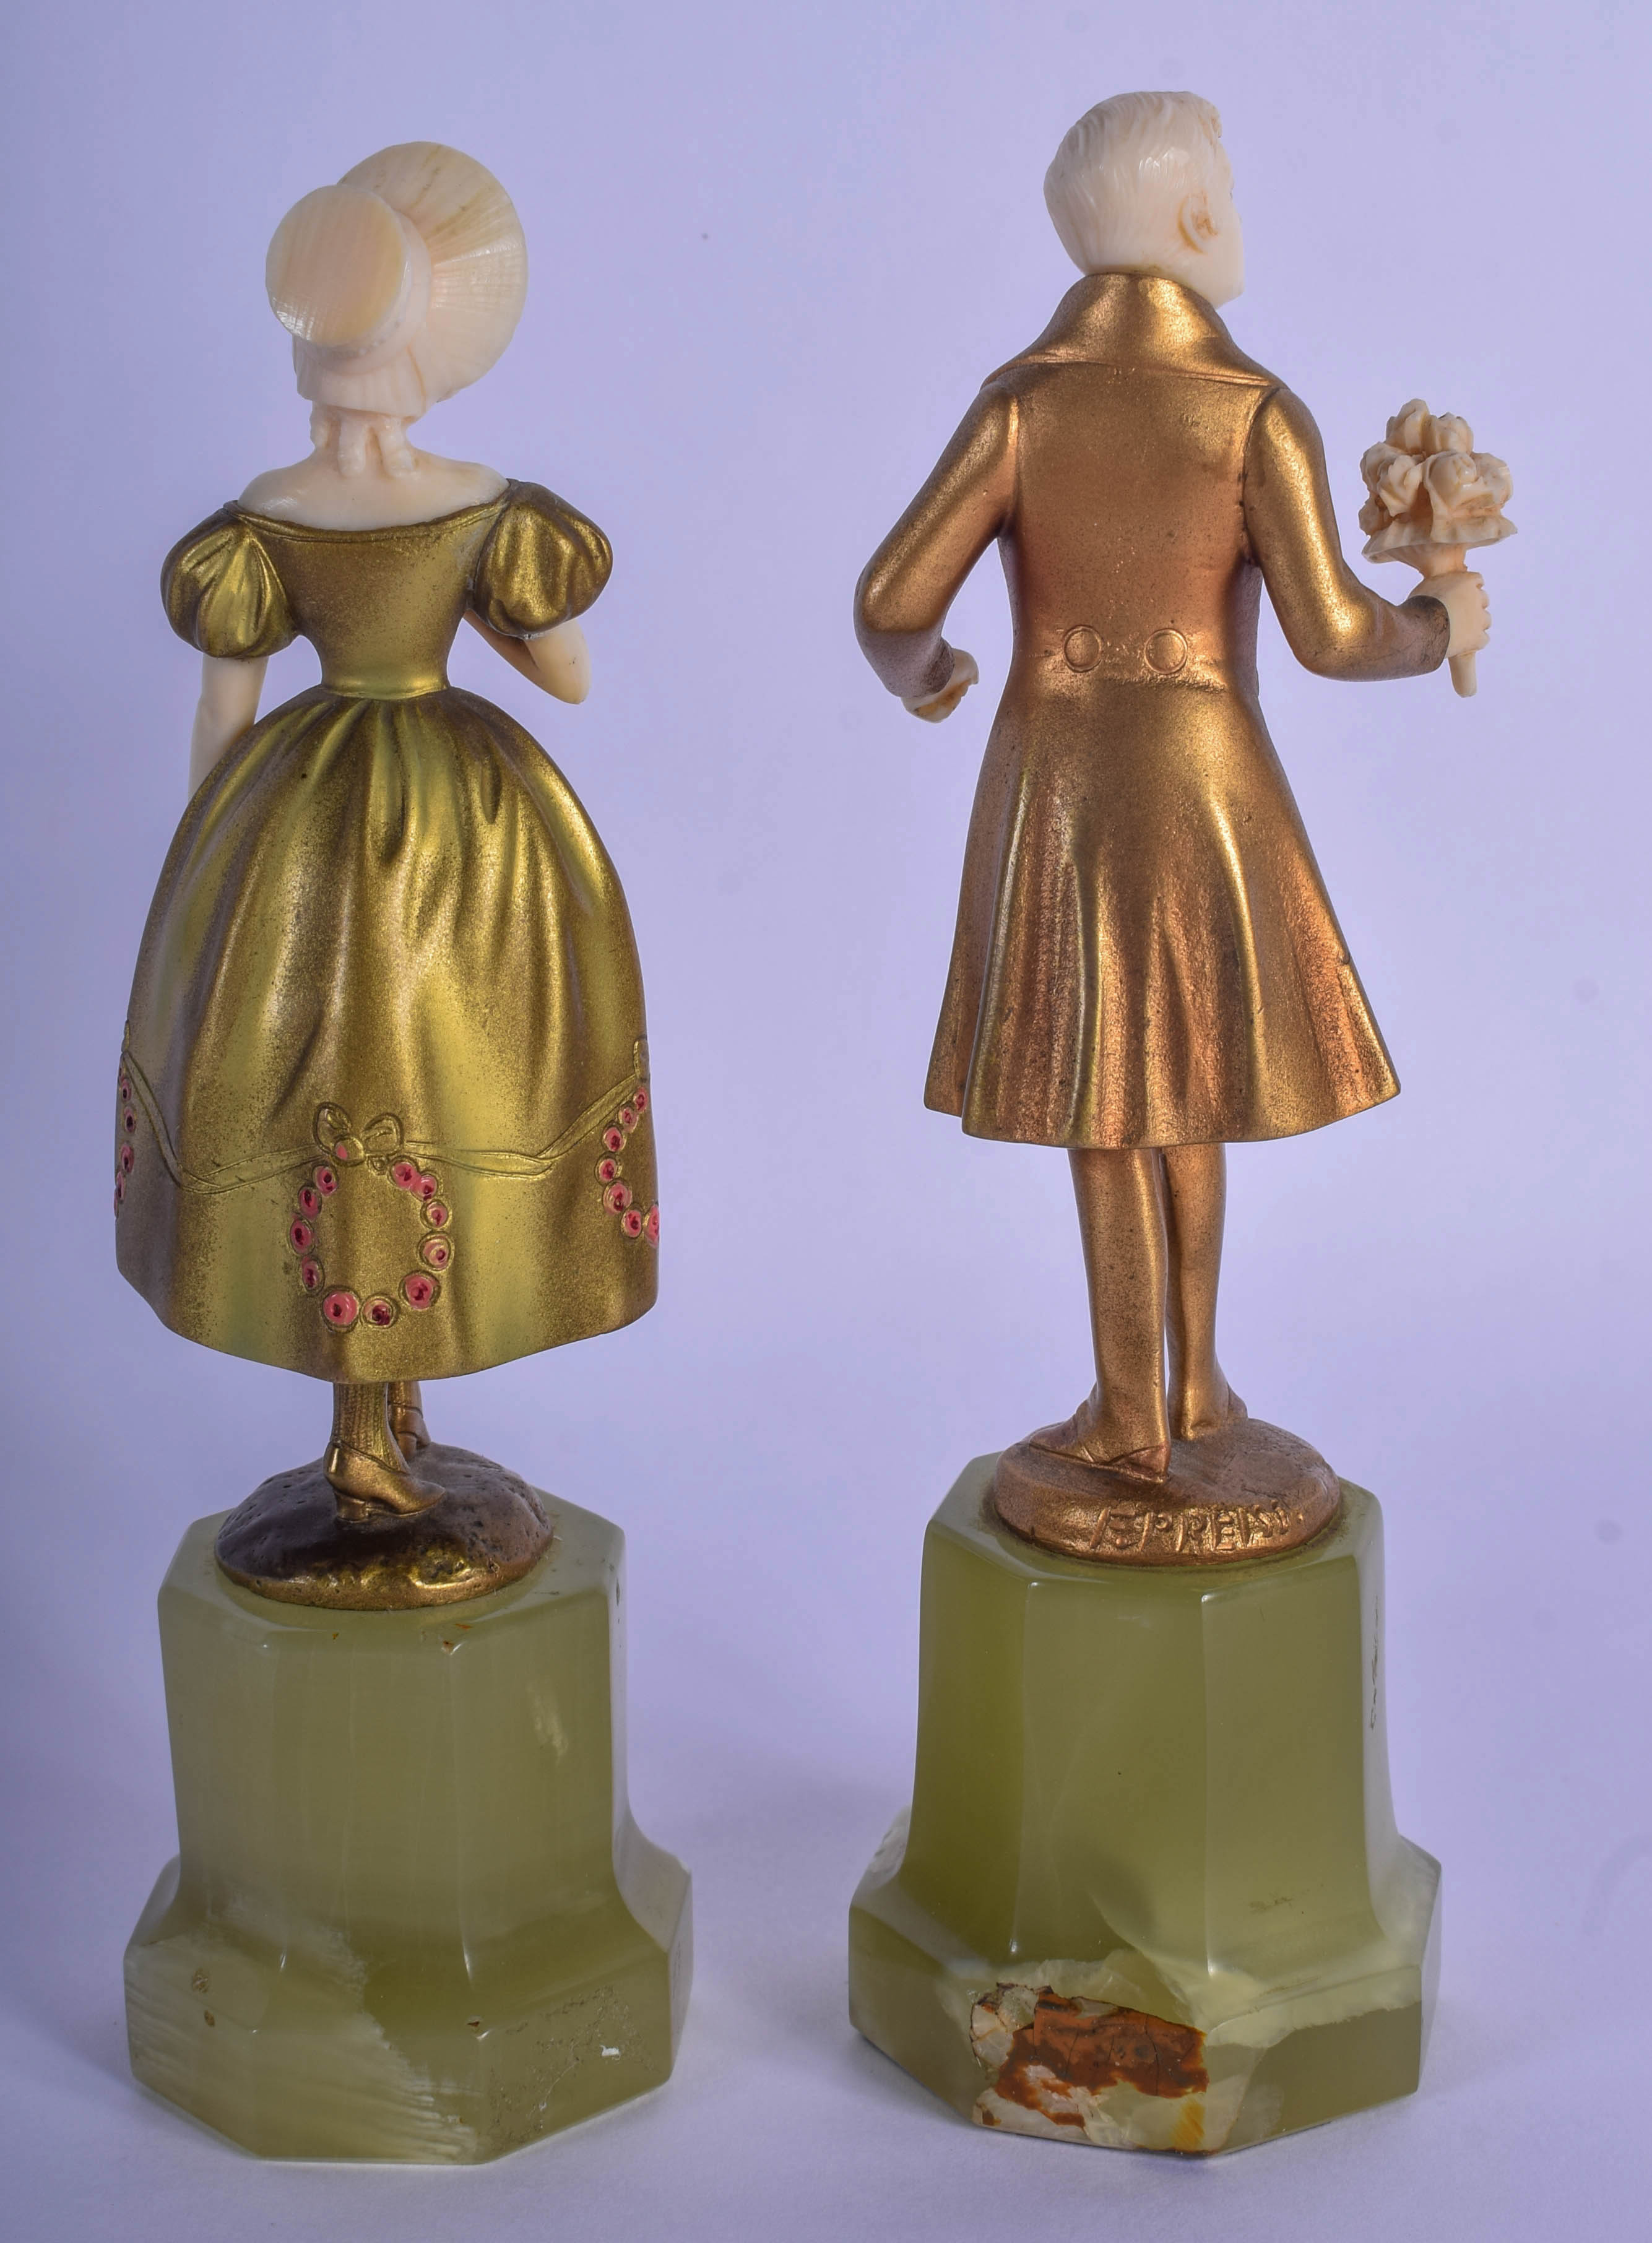 Ferdinand Preiss (1882-1943) German, Cold painted bronze and ivory, Boy and Girl Bronze. 11.5 cm hig - Image 2 of 5